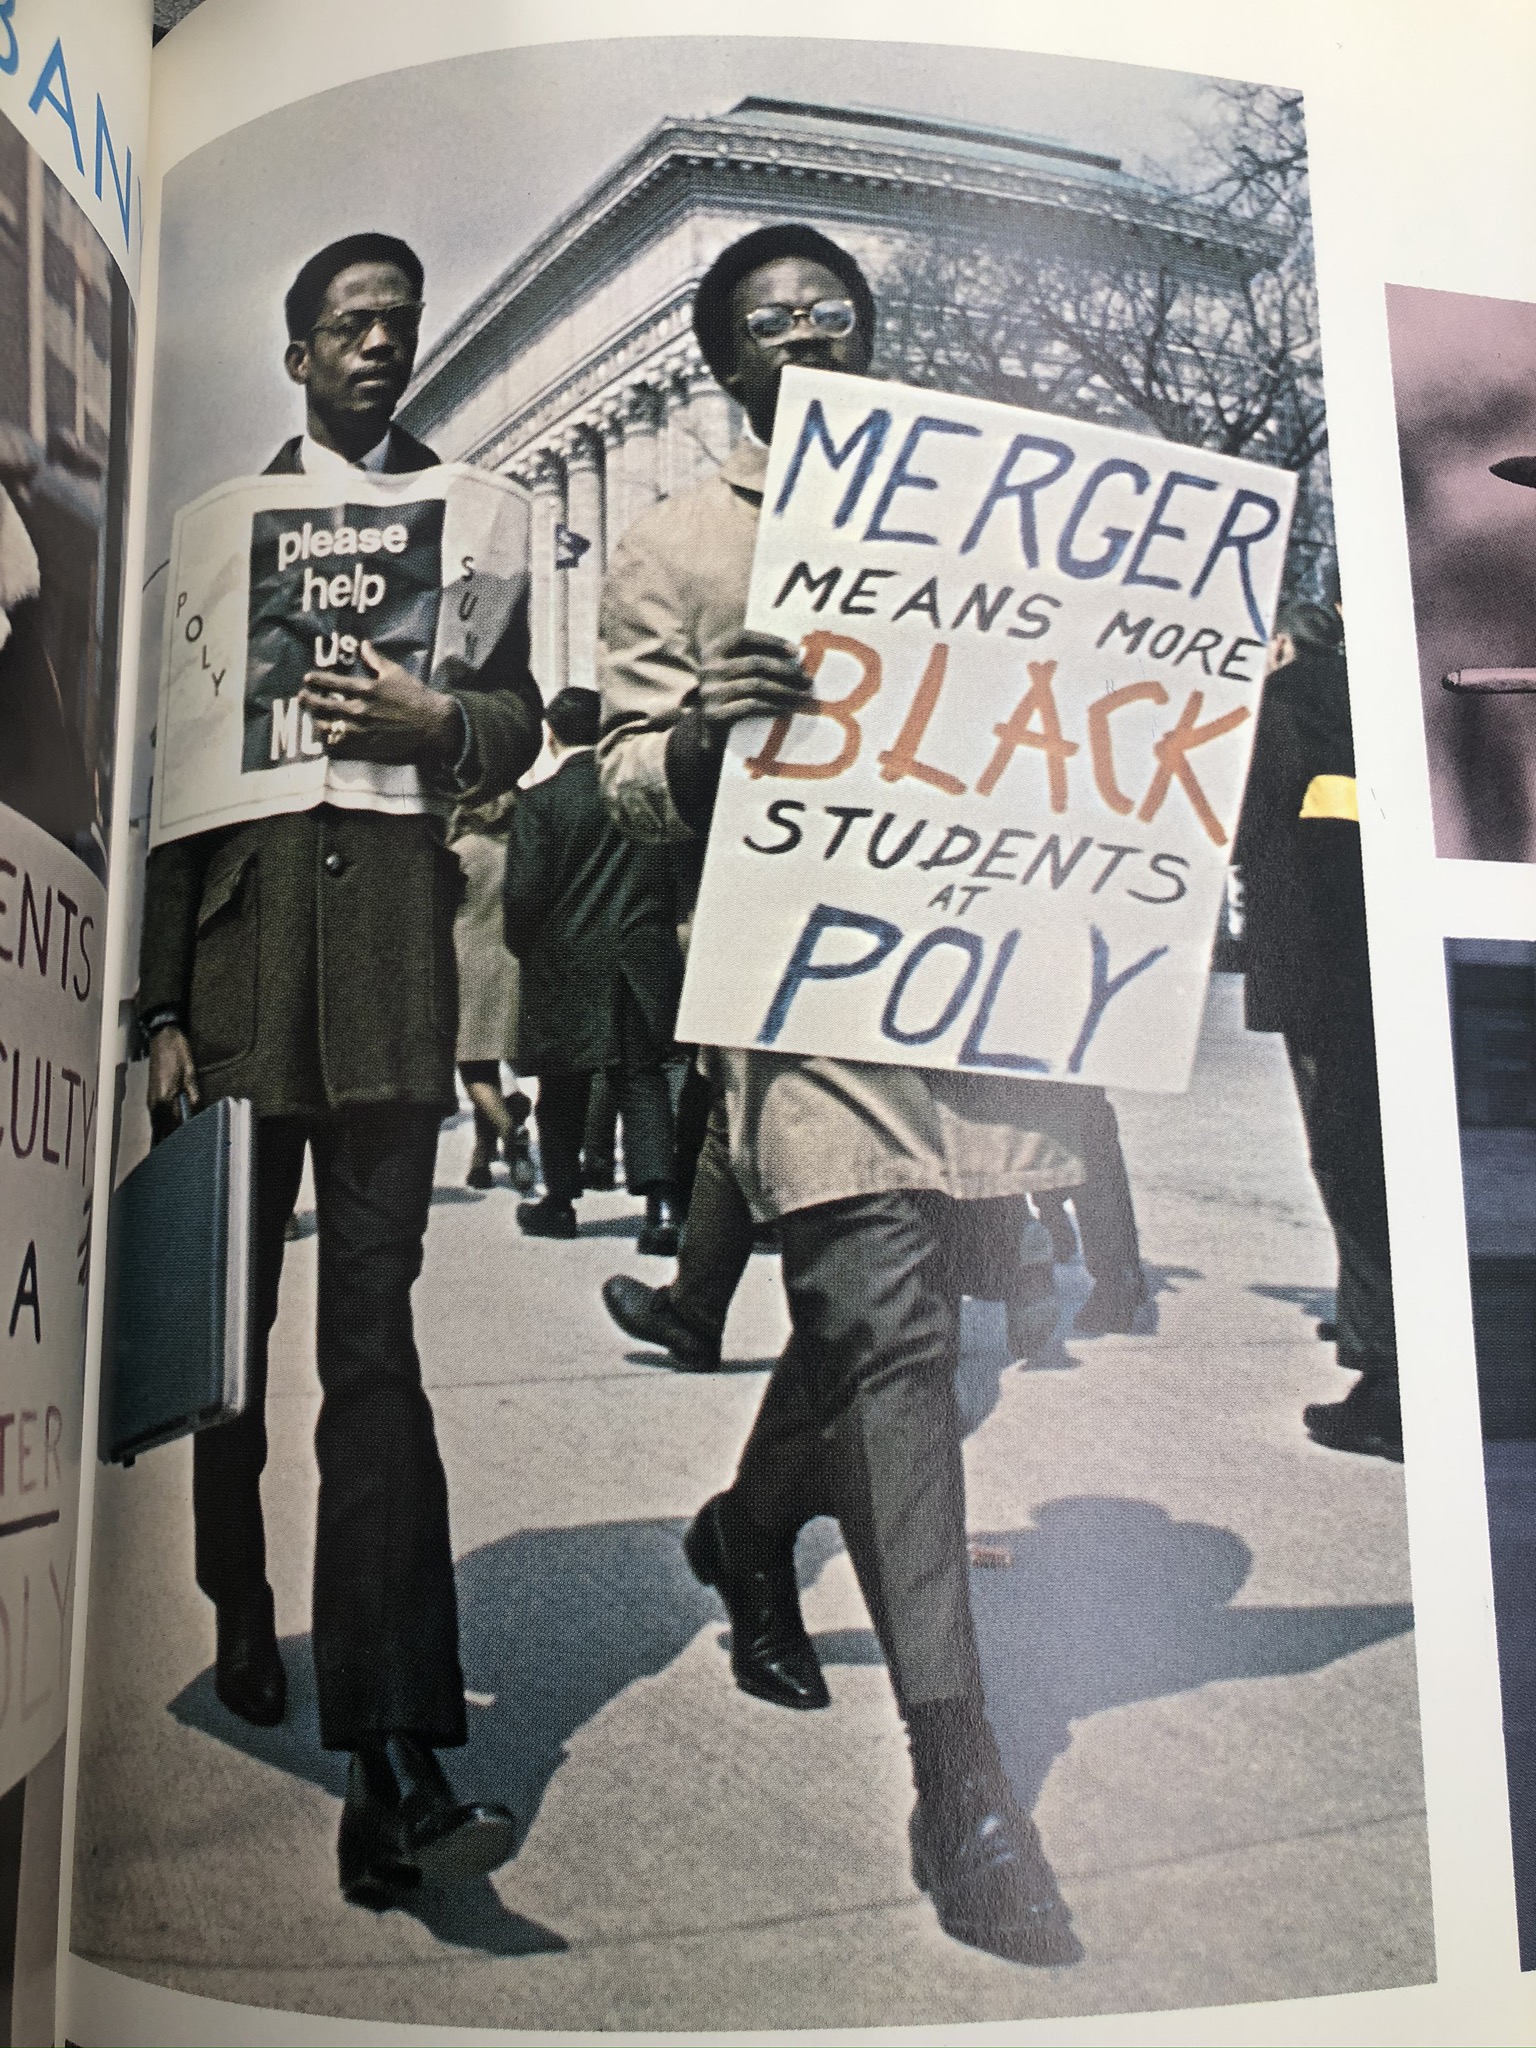 Black students protesting. Two clearly visible, one is holding up a sign that says, 'Merger Means More Black Students at Poly;'. From Polywog 1968